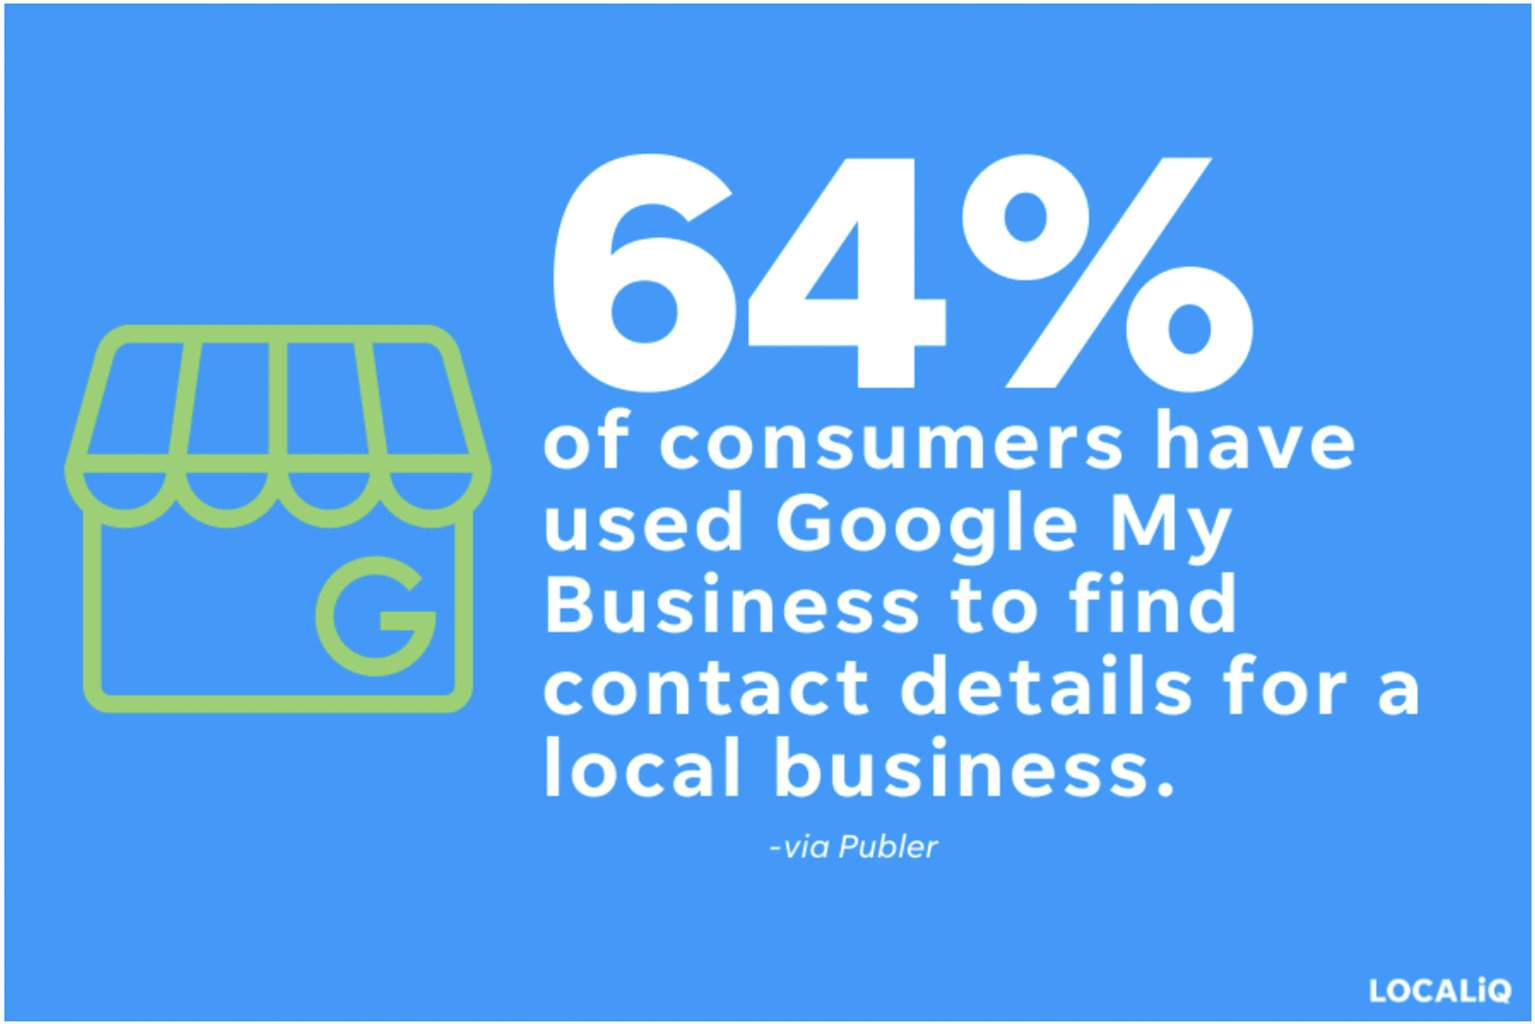 64% of consumers have used Google My Business